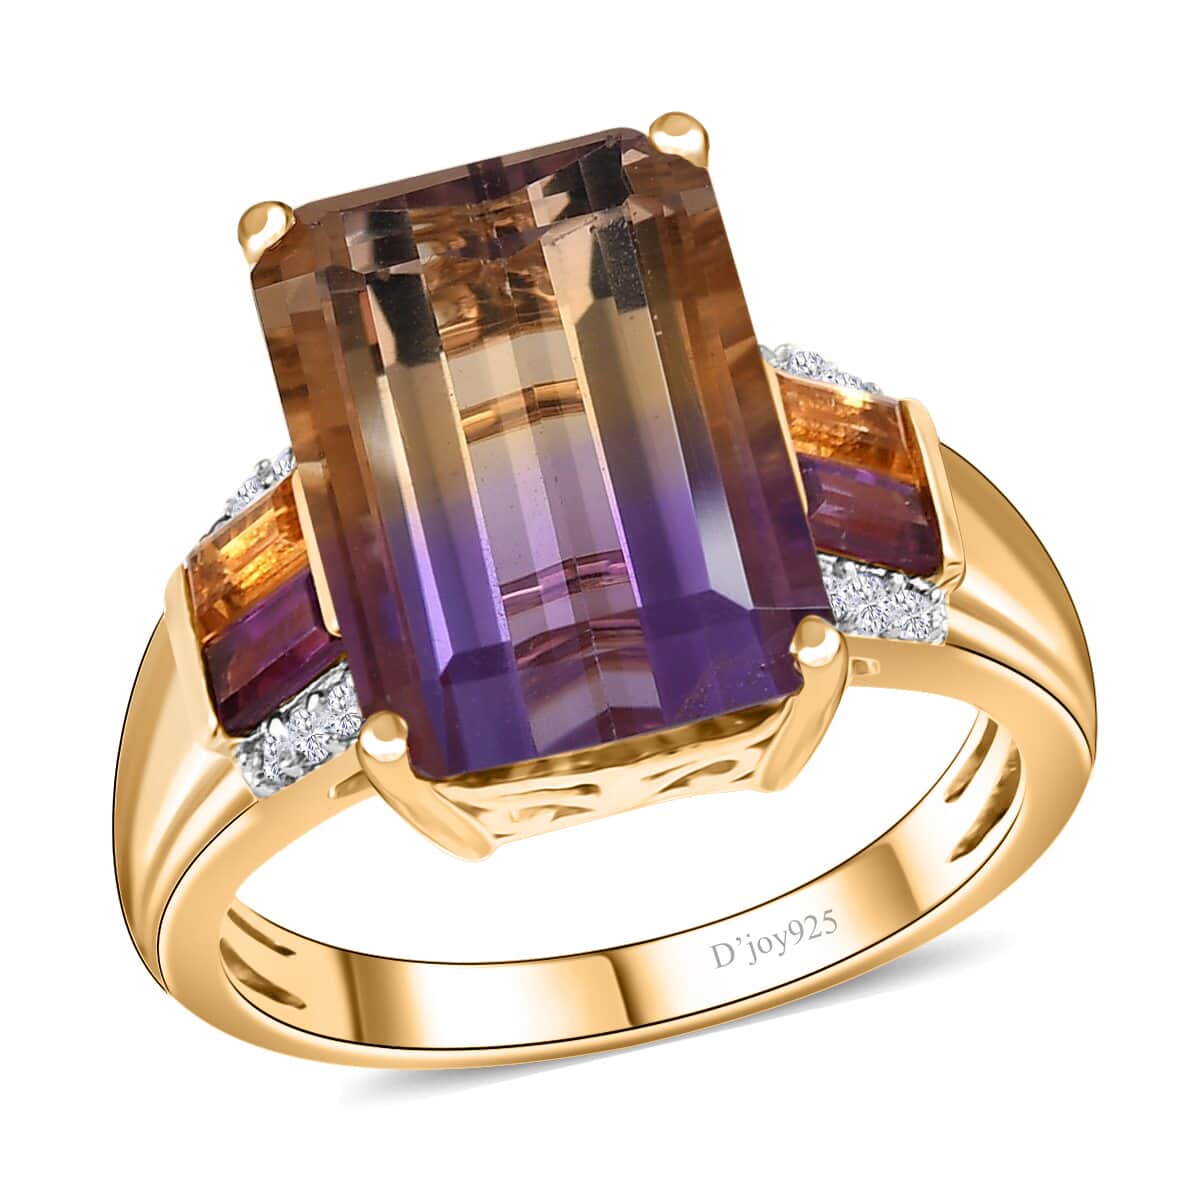 AAA Anahi Ametrine and Multi Gemstone Ring in Vermeil Yellow Gold Over Sterling Silver, Ametrine Jewelry, Birthday Gift For Her 7.25 ctw (Del. 10-15 Days) image number 0